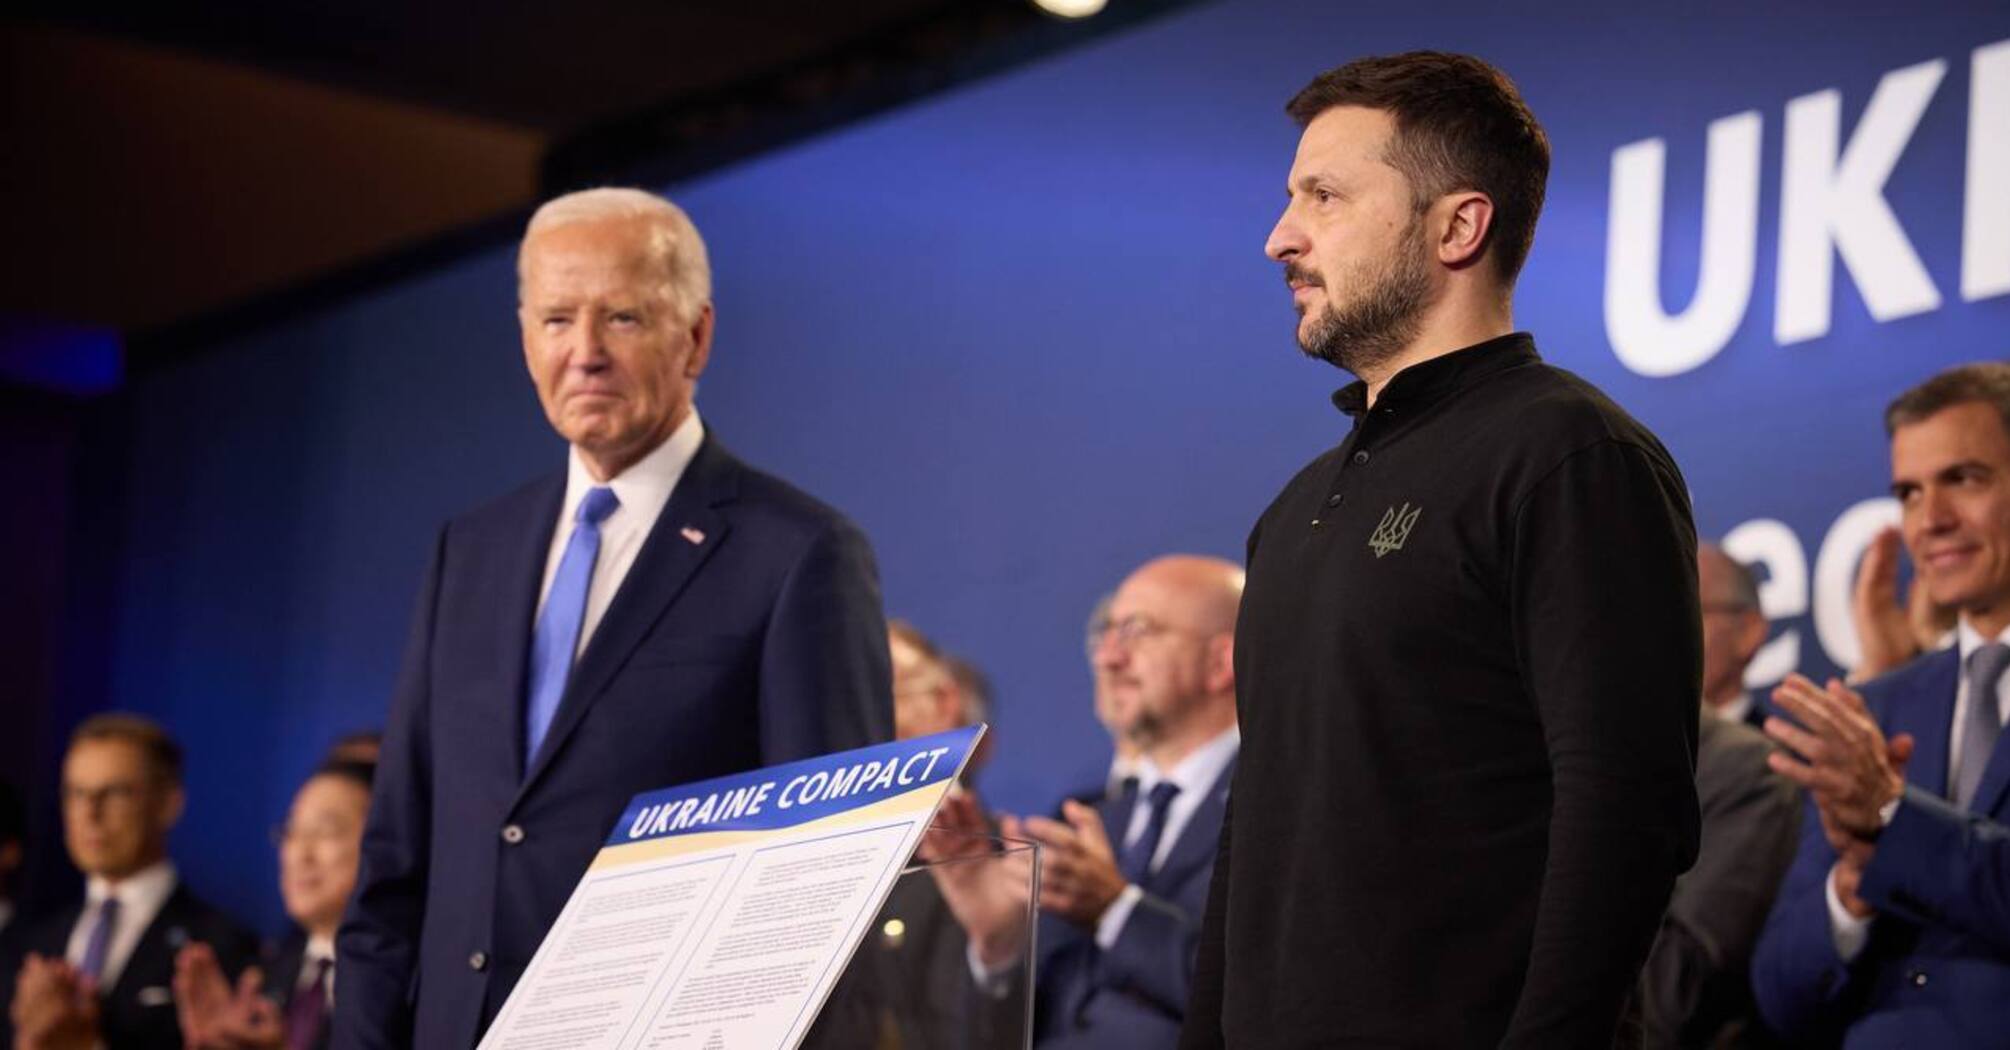 Historic Ukraine Compact signed at NATO summit: main provisions of the document